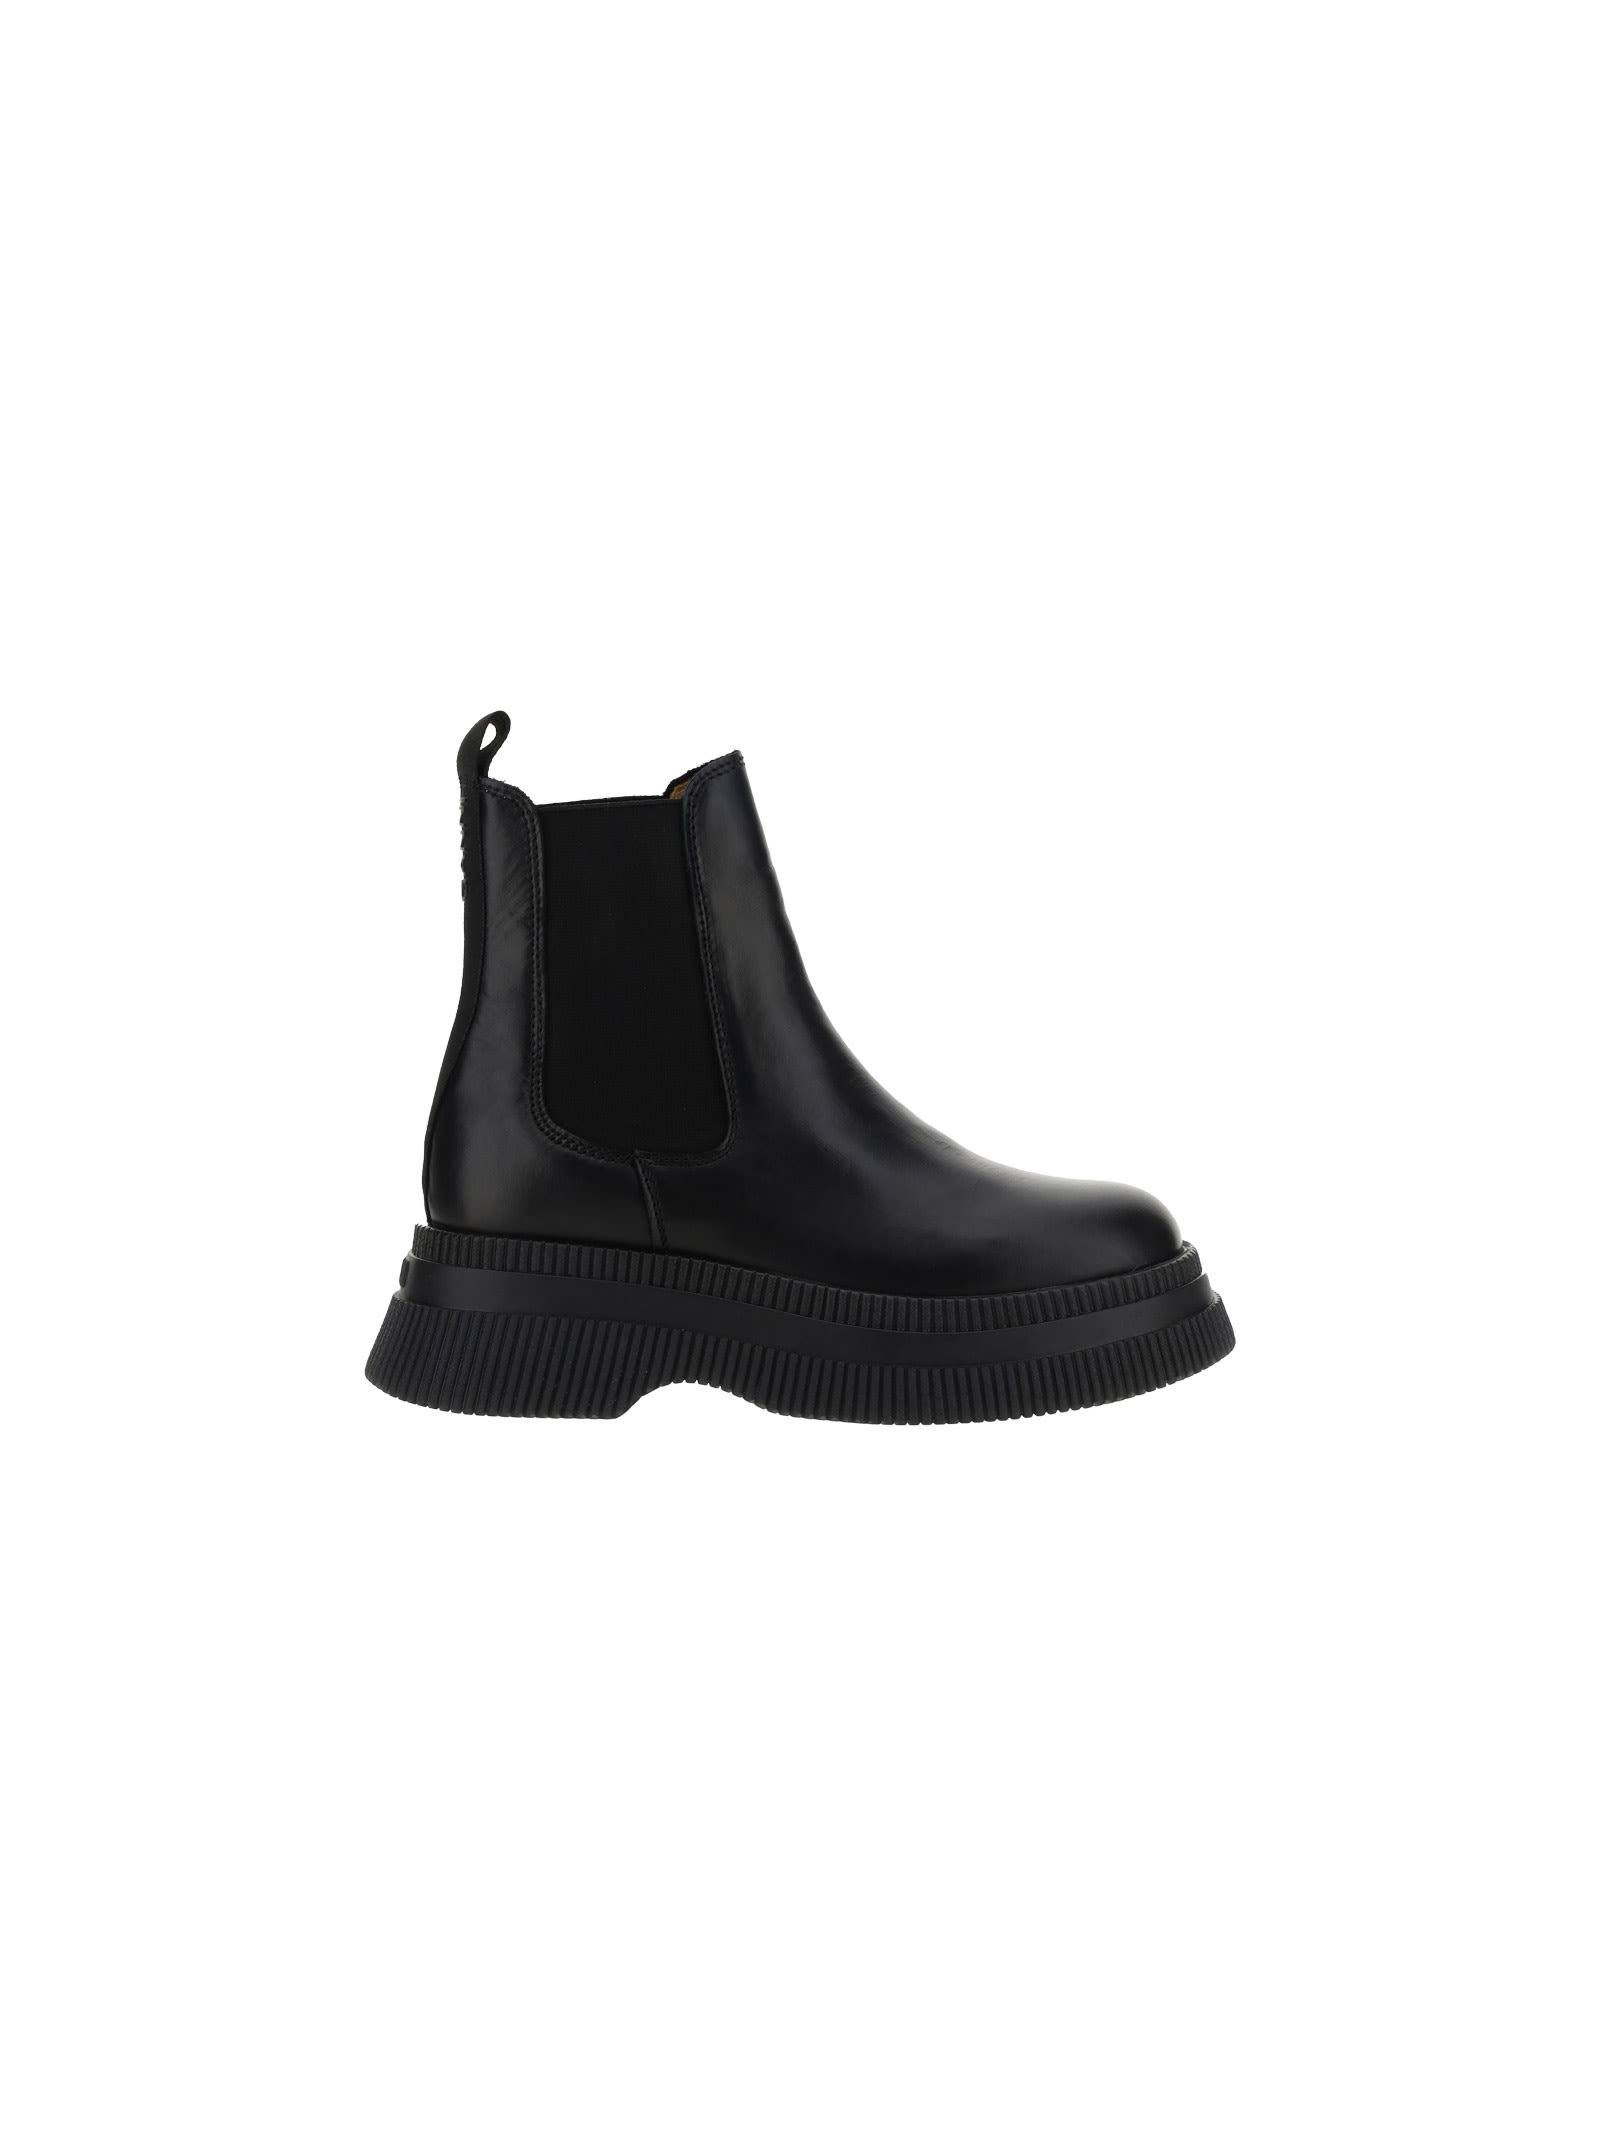 Ganni Creepers Chelsea Boots